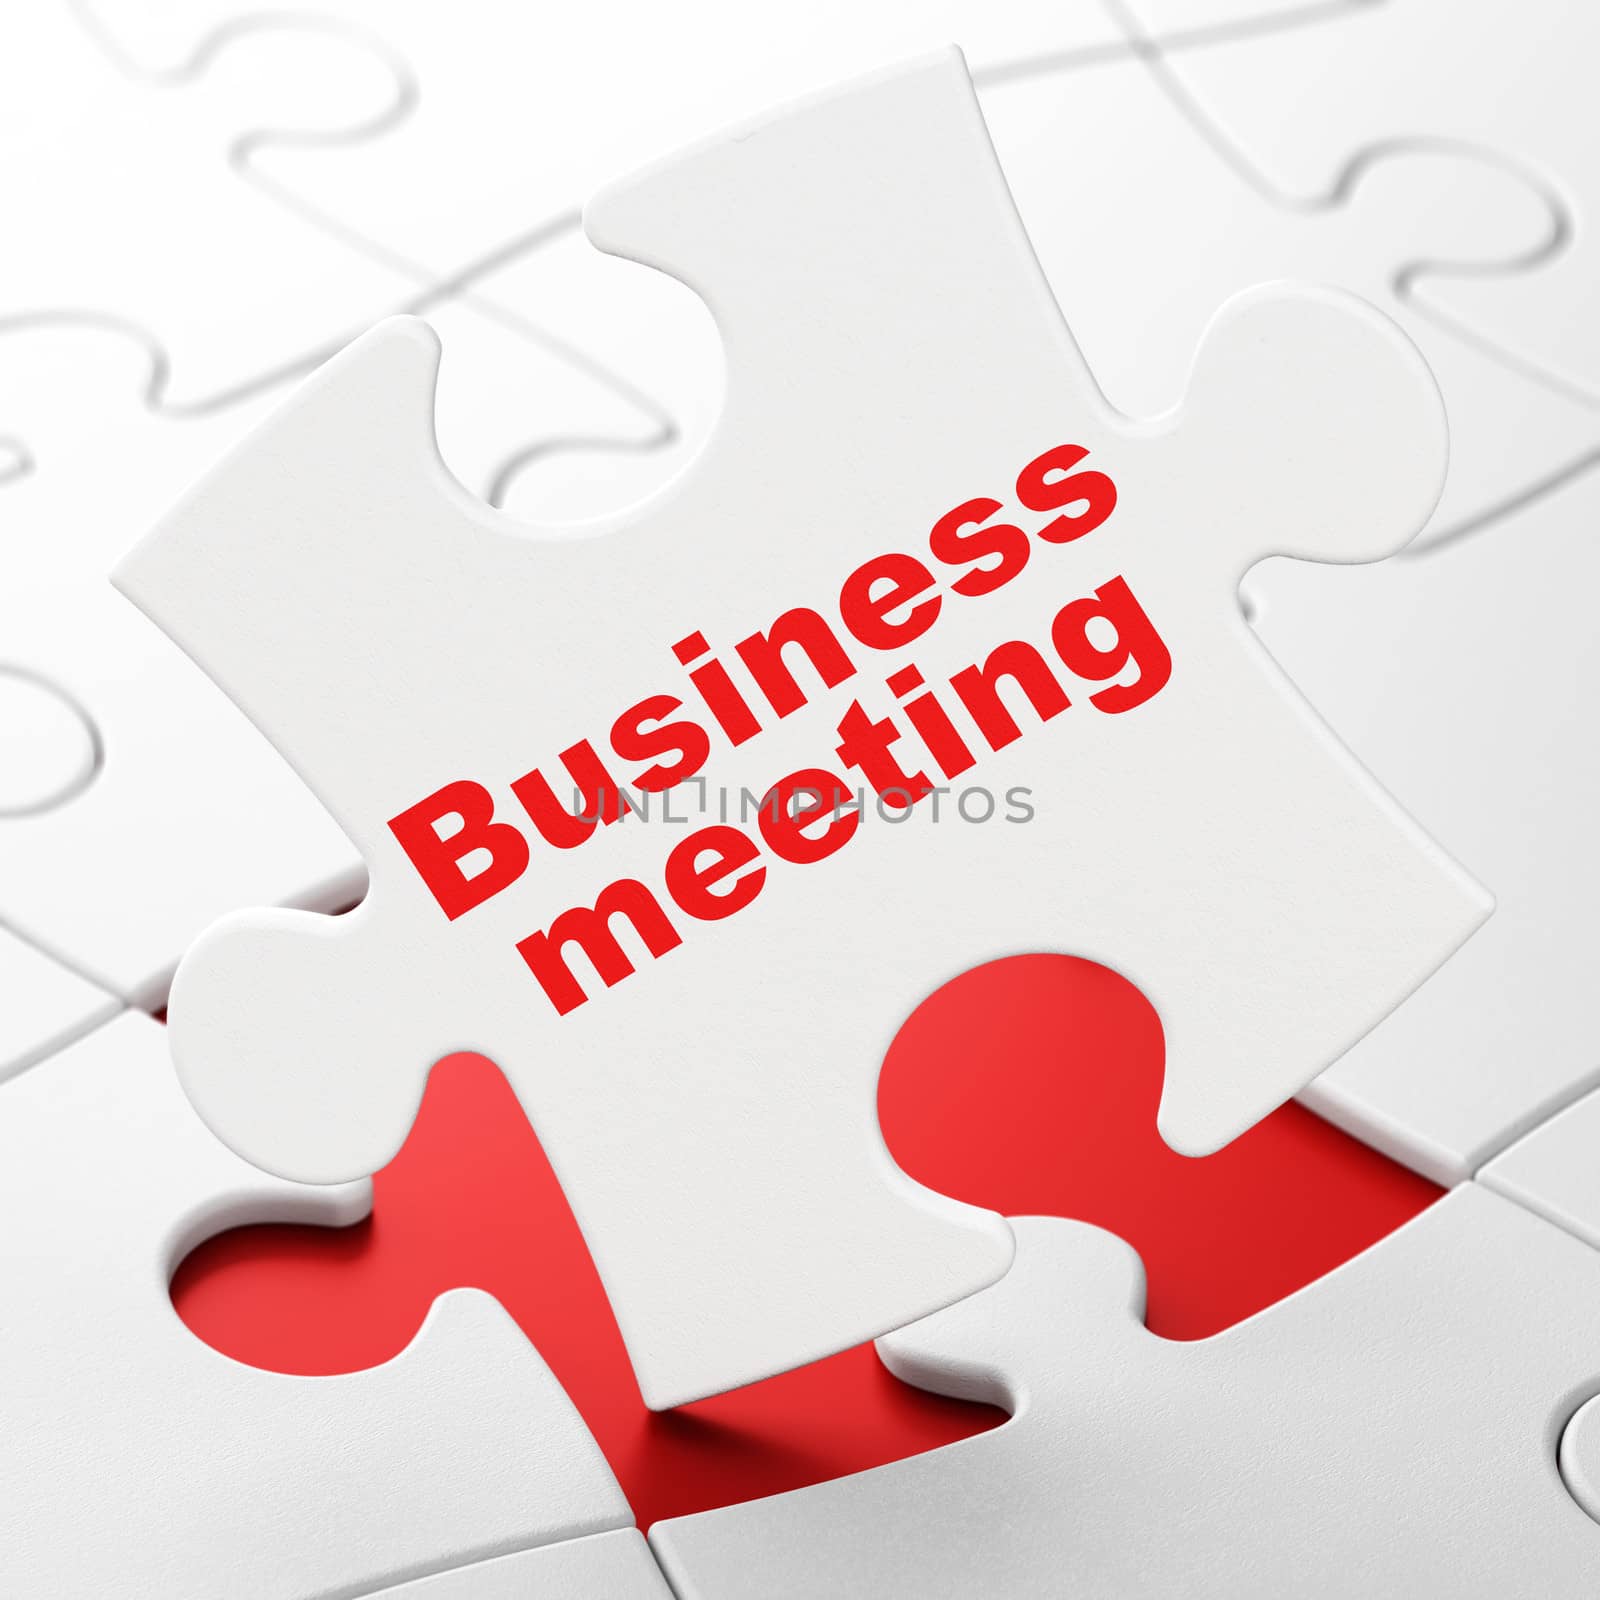 Business concept: Business Meeting on White puzzle pieces background, 3d render